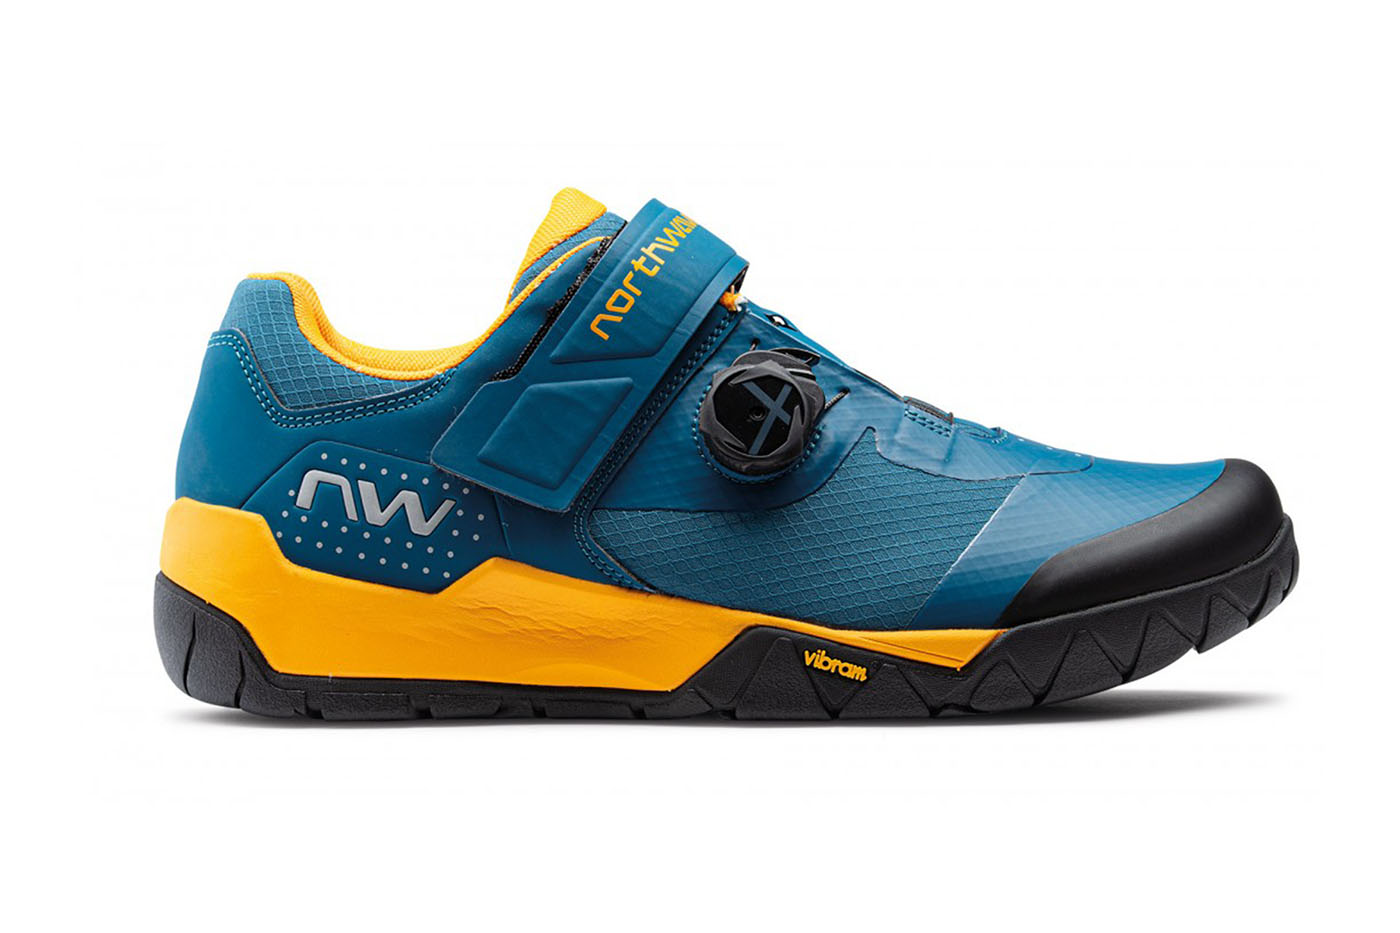 Northwave 2022 Shoes